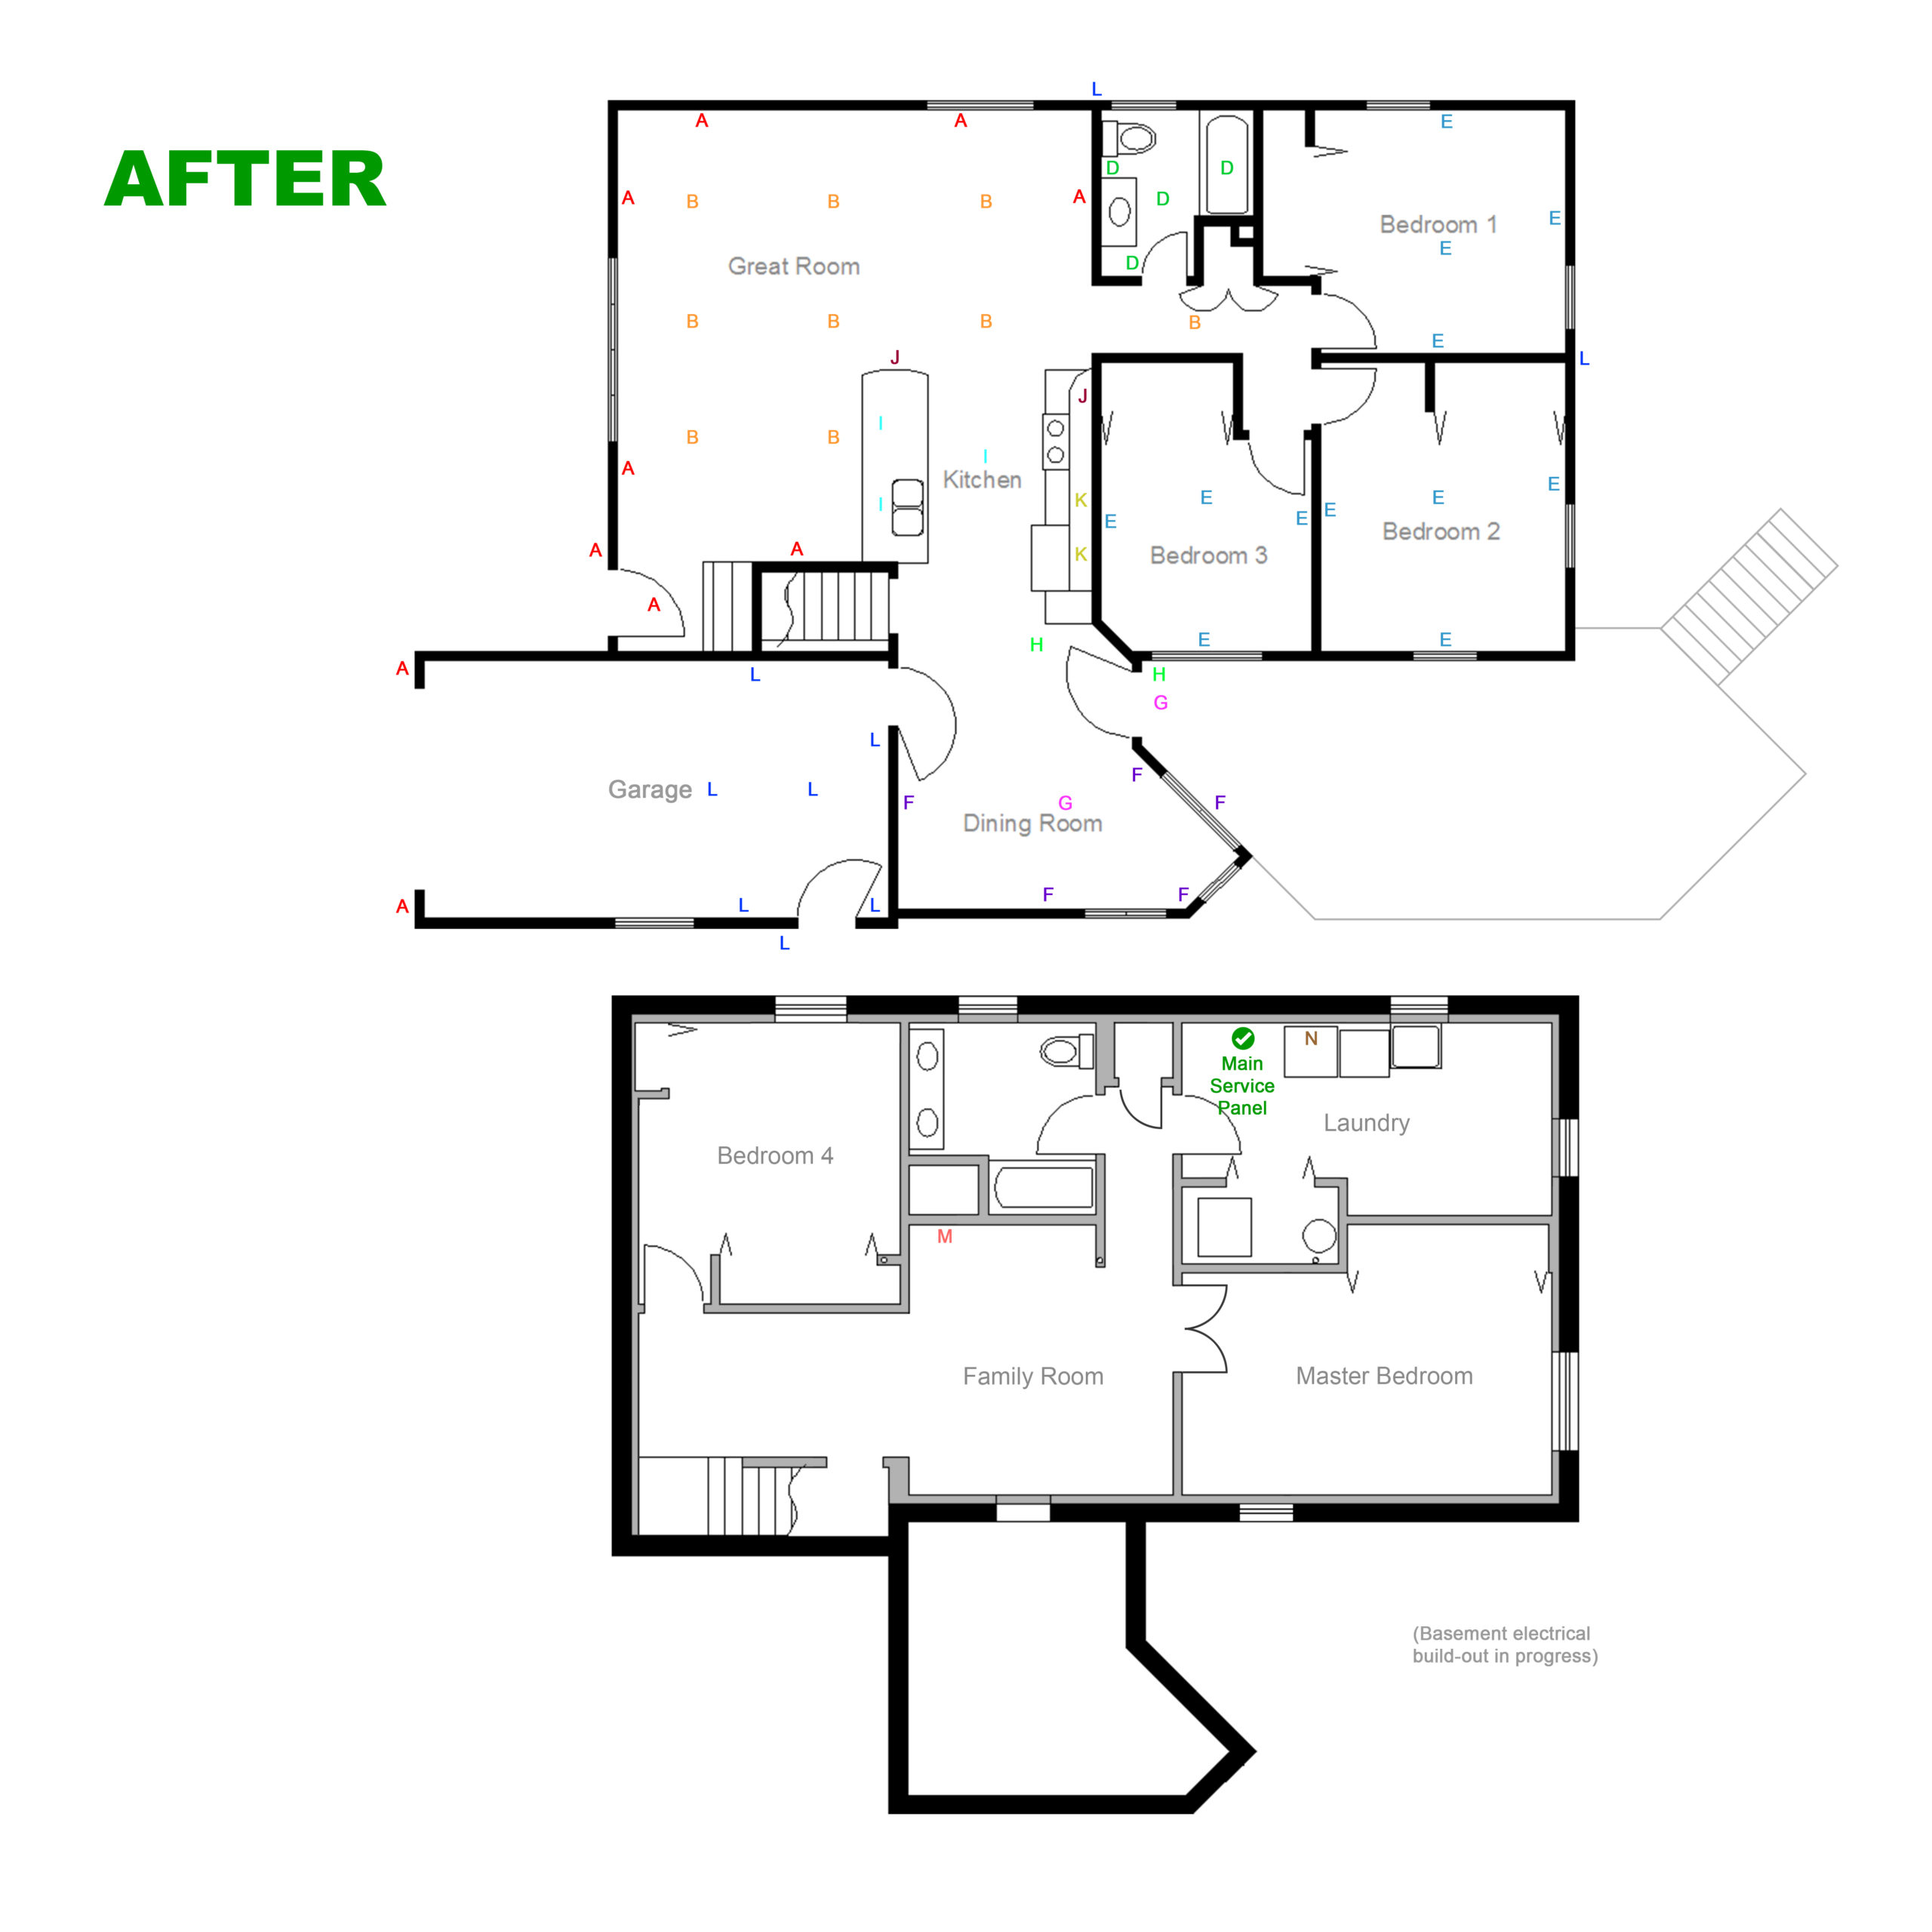 AFTER: House floorplan showing circuits organized into small, logical groups.